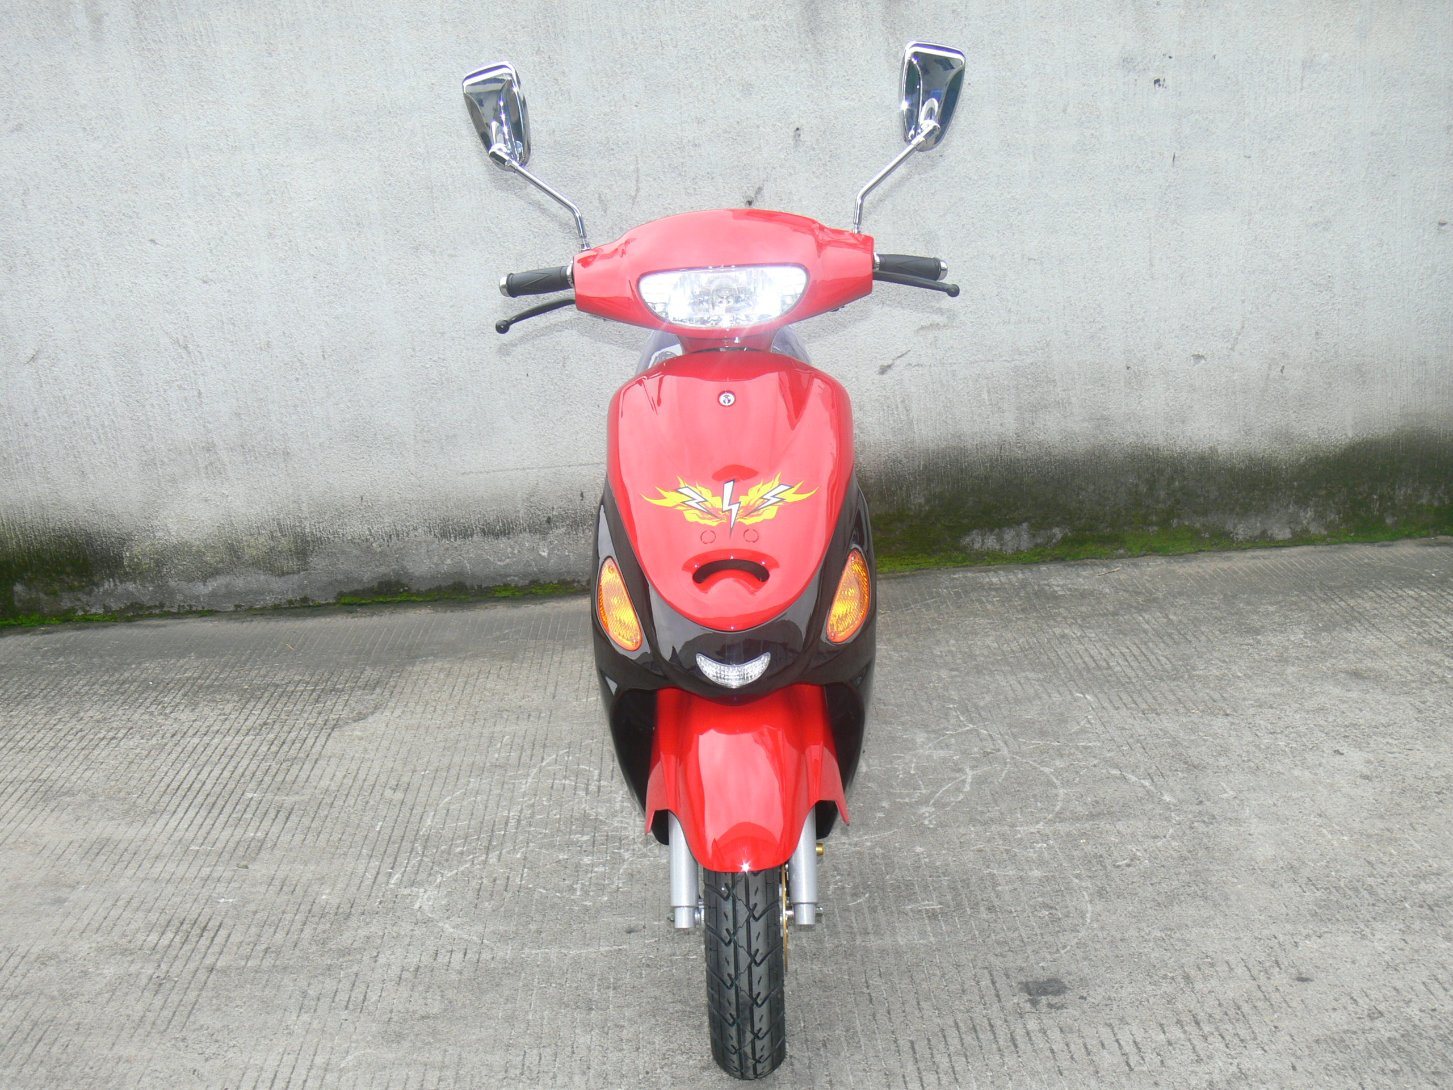 50cc Gas Scooter Sunny Scooter 1-Cylinder 4-Stroke Air-Cooled